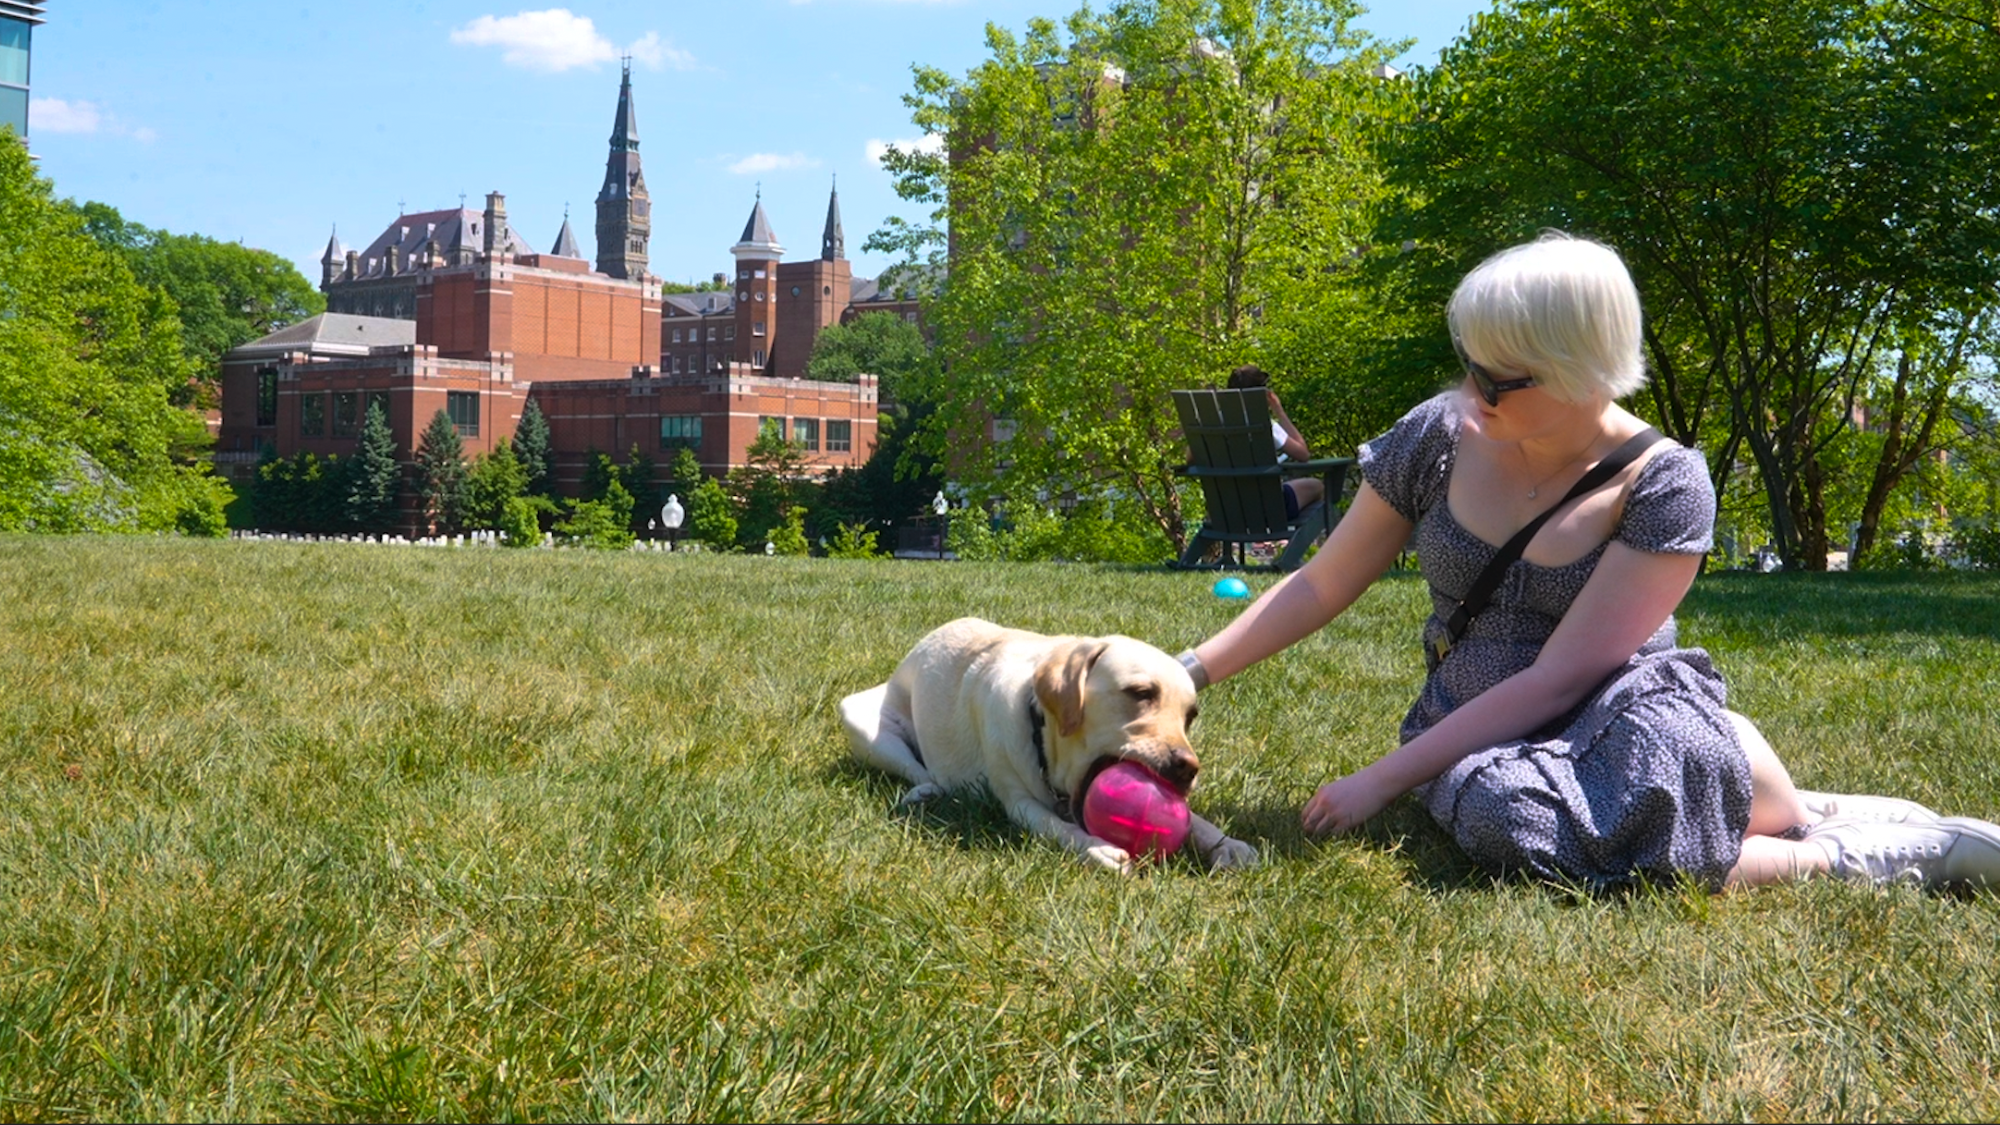 Marissa Nissley (B'24) has traversed the Hilltop accompanied by her guide dog, Smalls.